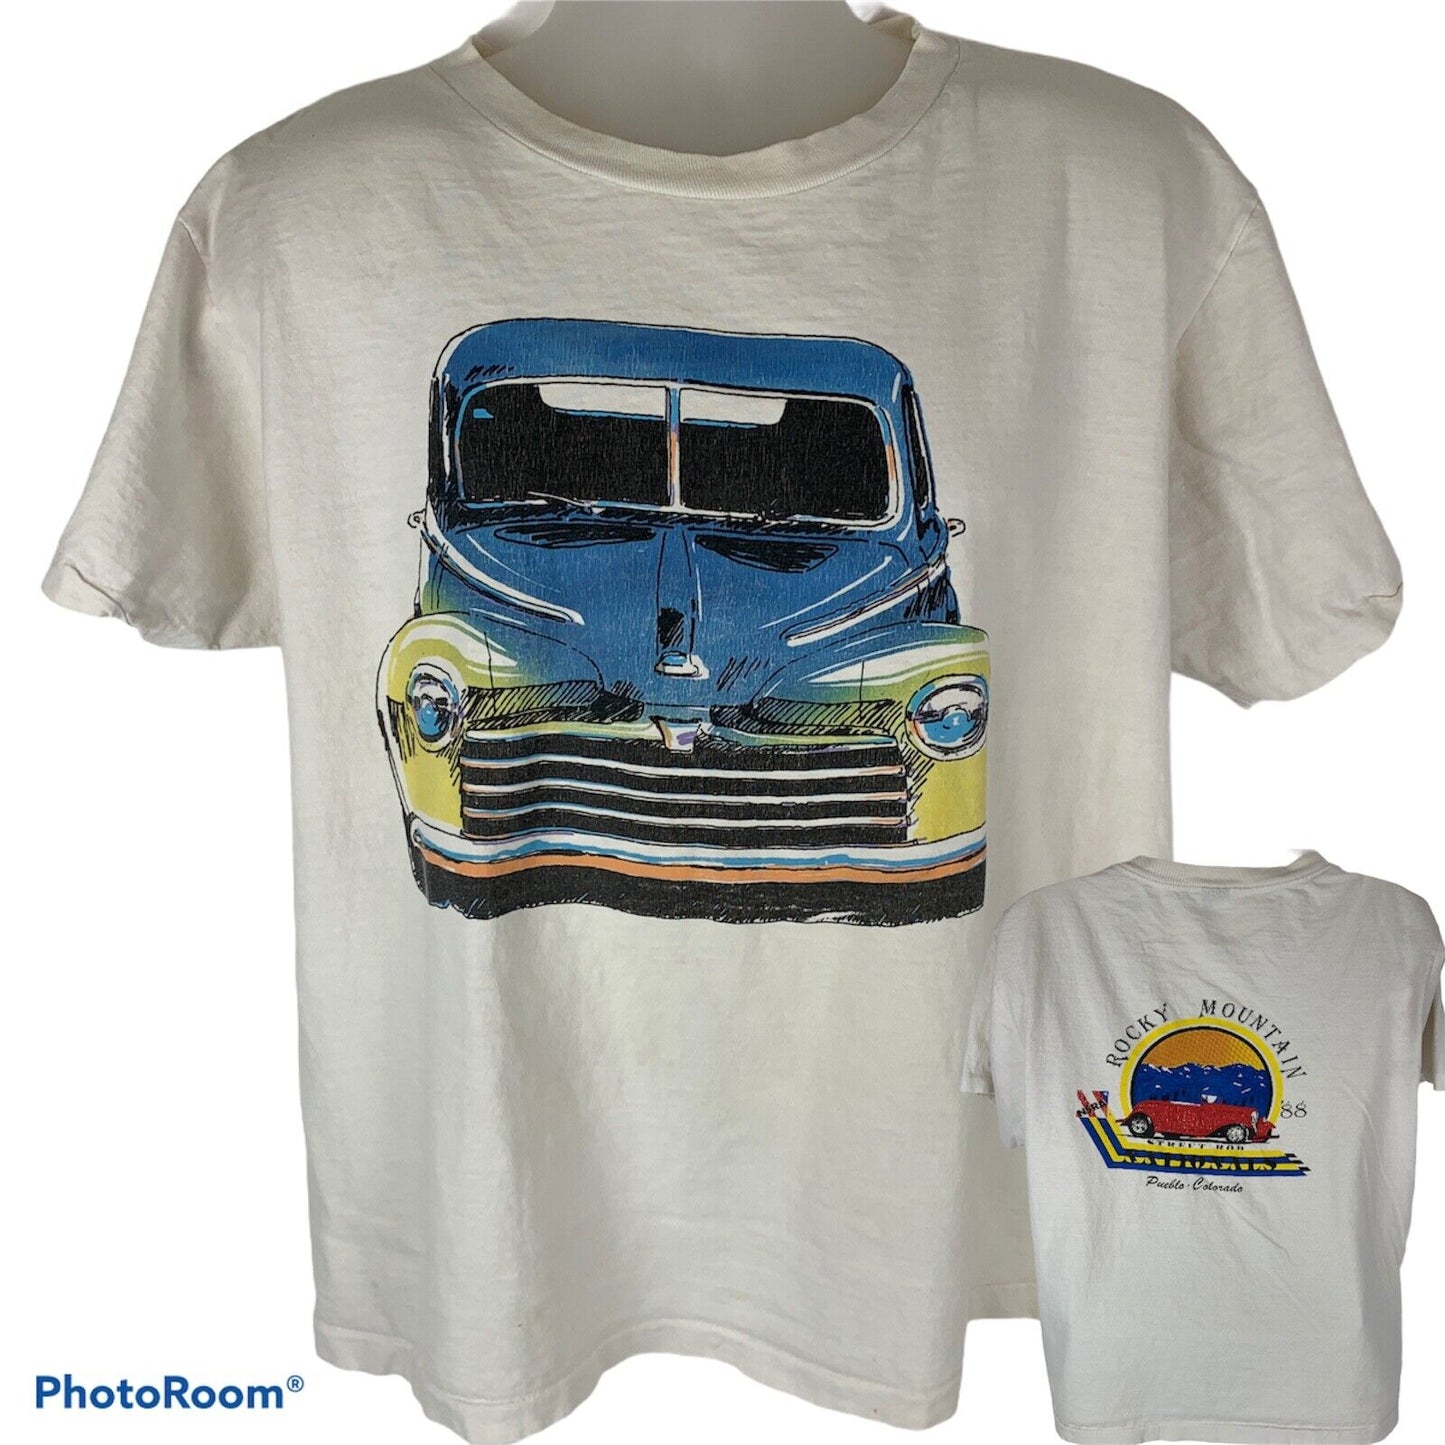 Rocky Mountain Street Rod Nationals Vintage 80s T Shirt X-Large Tee Mens White